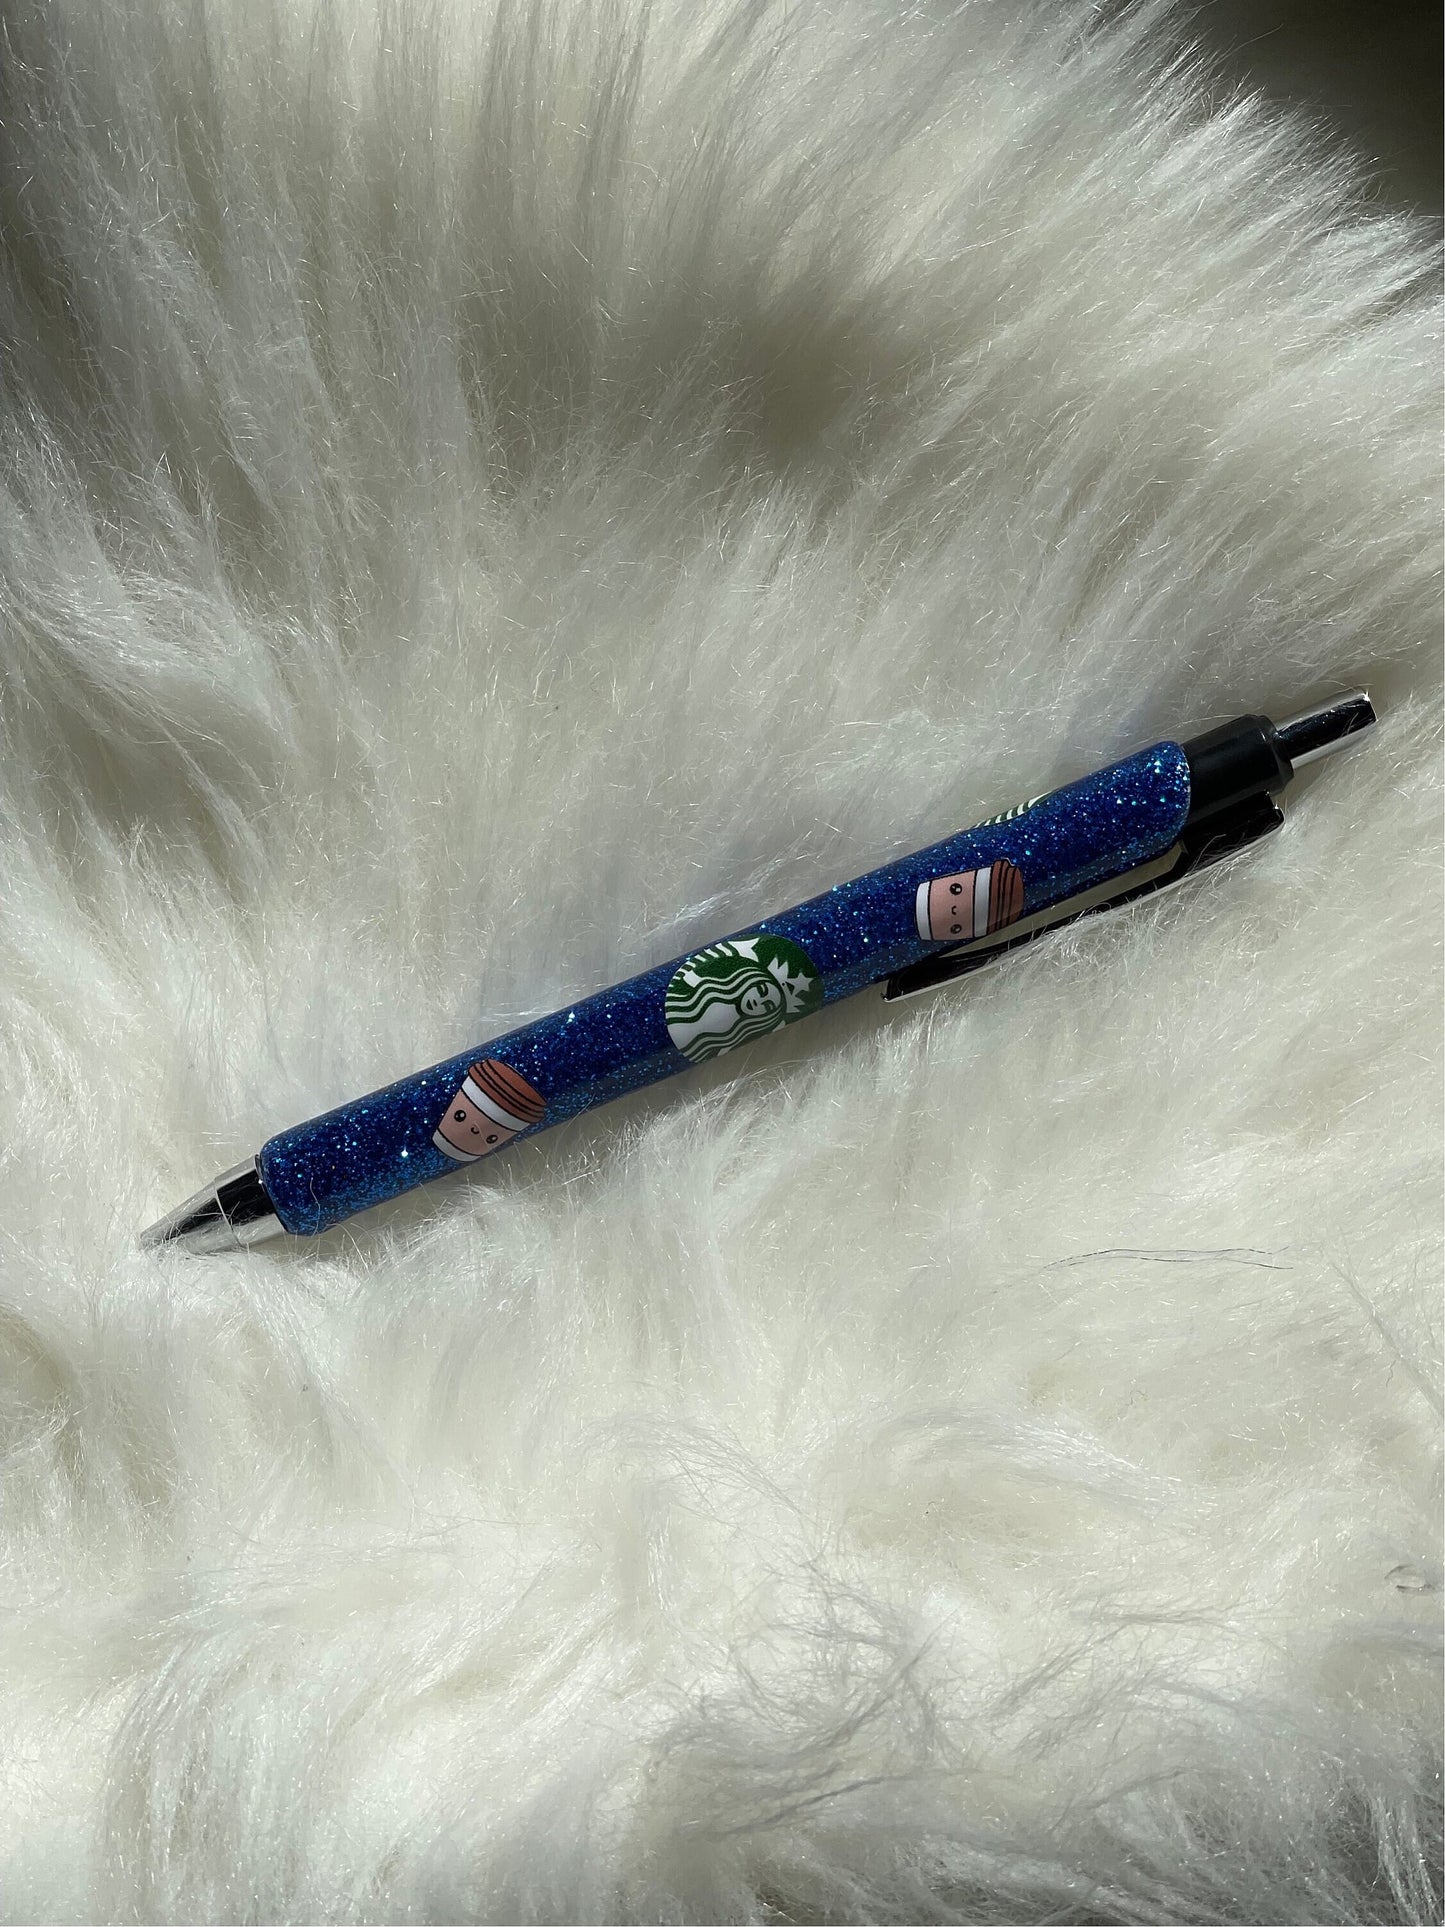 Custom name resin epoxy glitter pens with clip ballpoint pen retractable gift for him her friend co-worker teacher occassion birthday